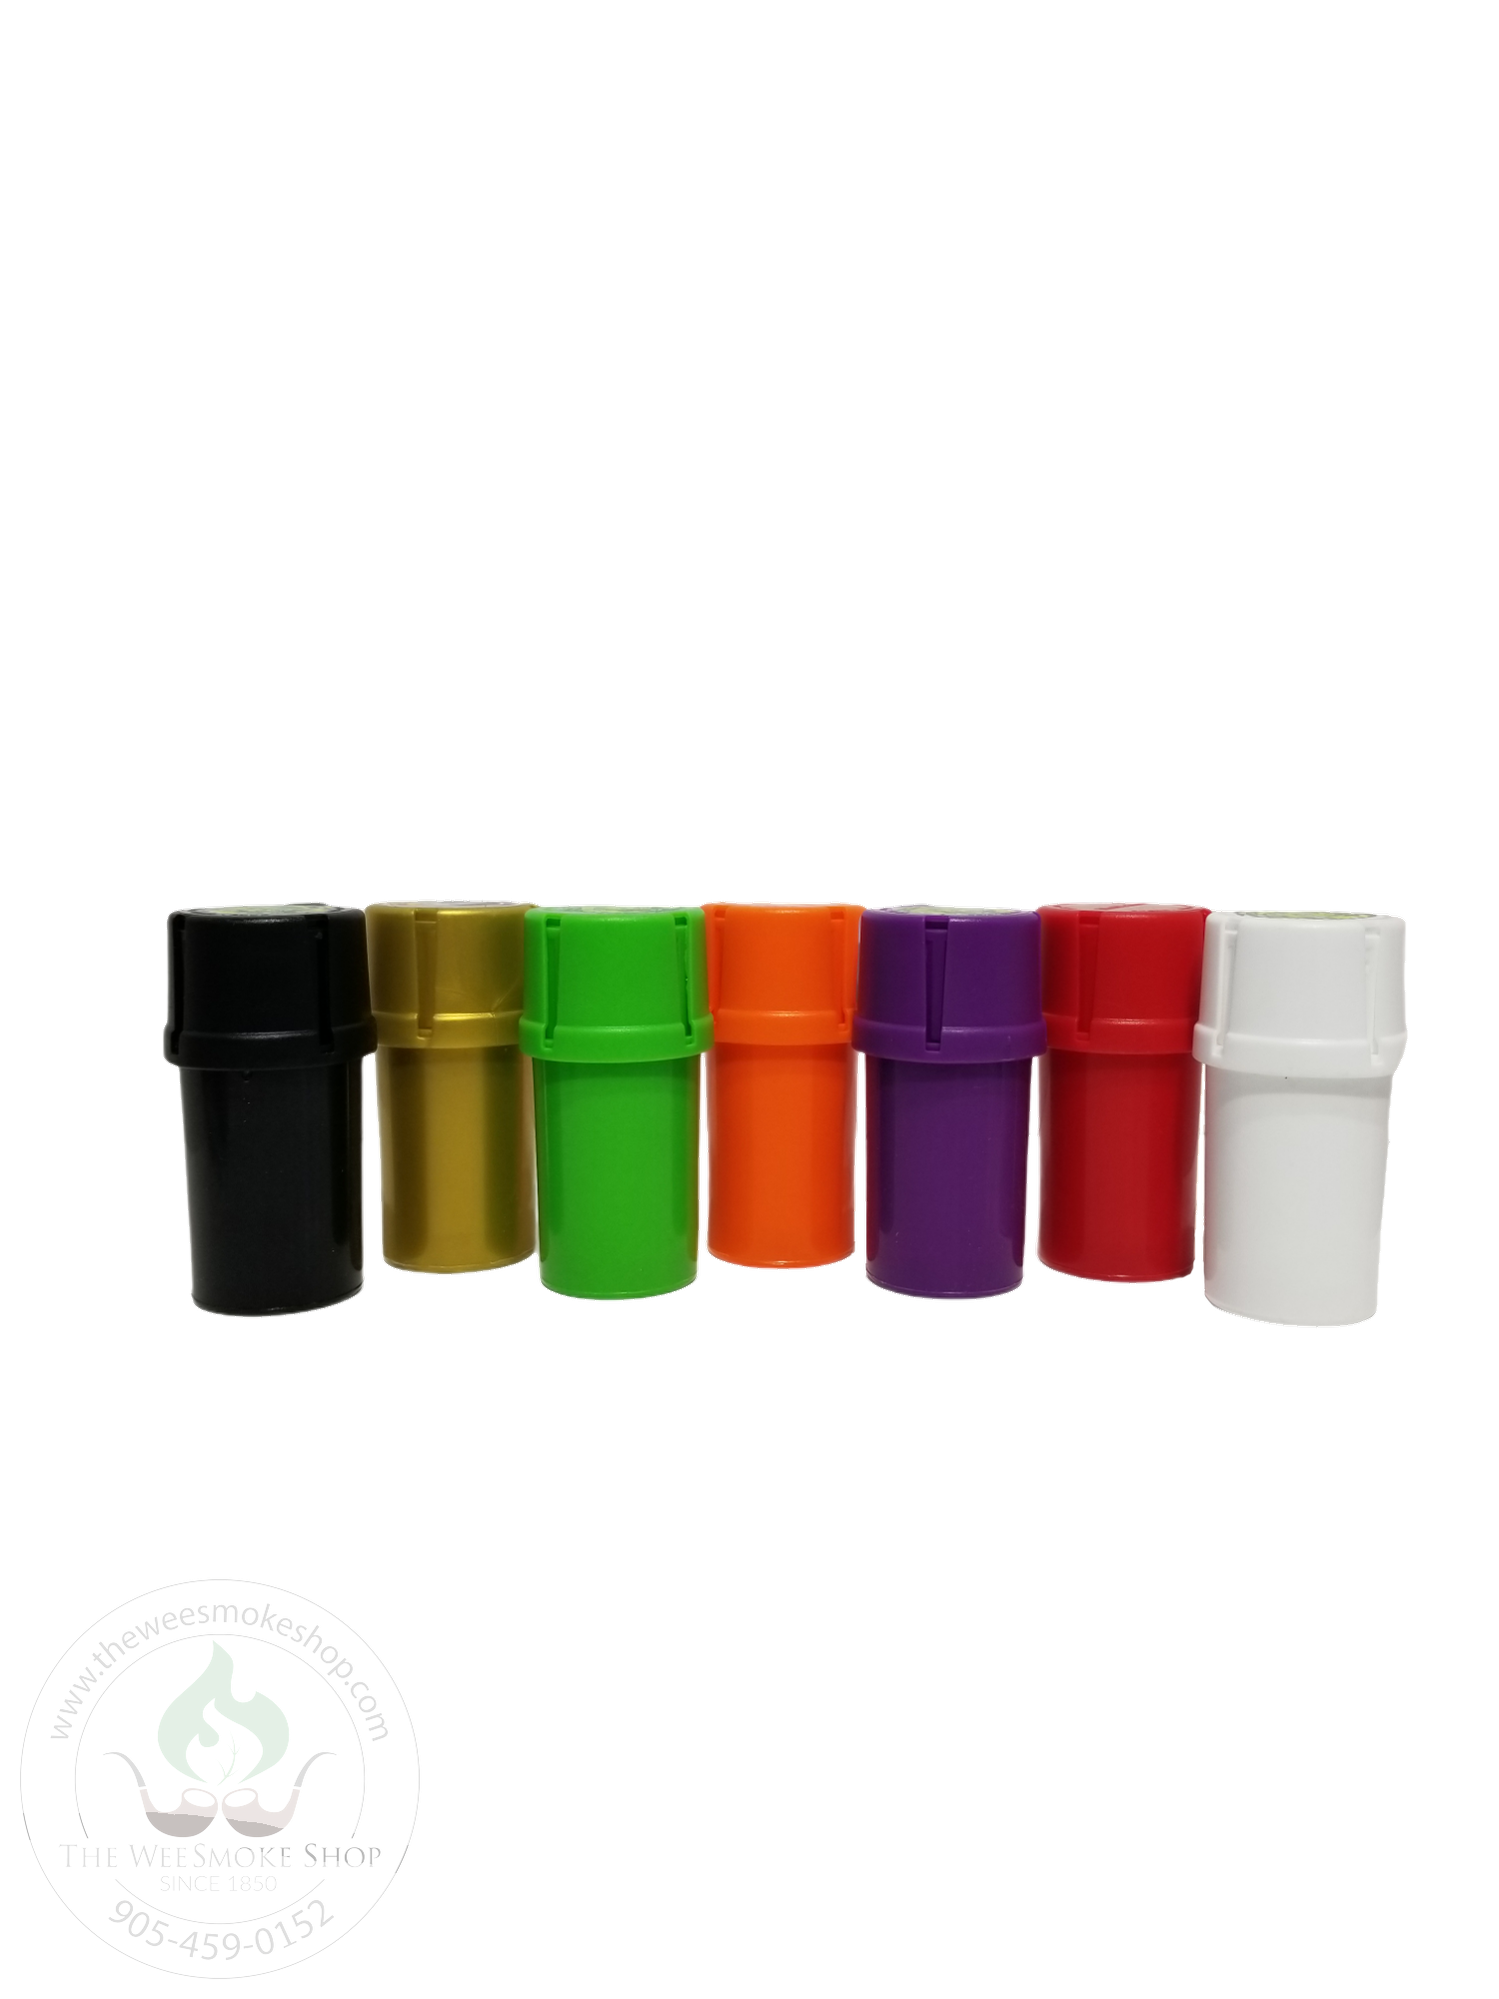 Black, gold, green, orange, purple, red, white medtainers in a row